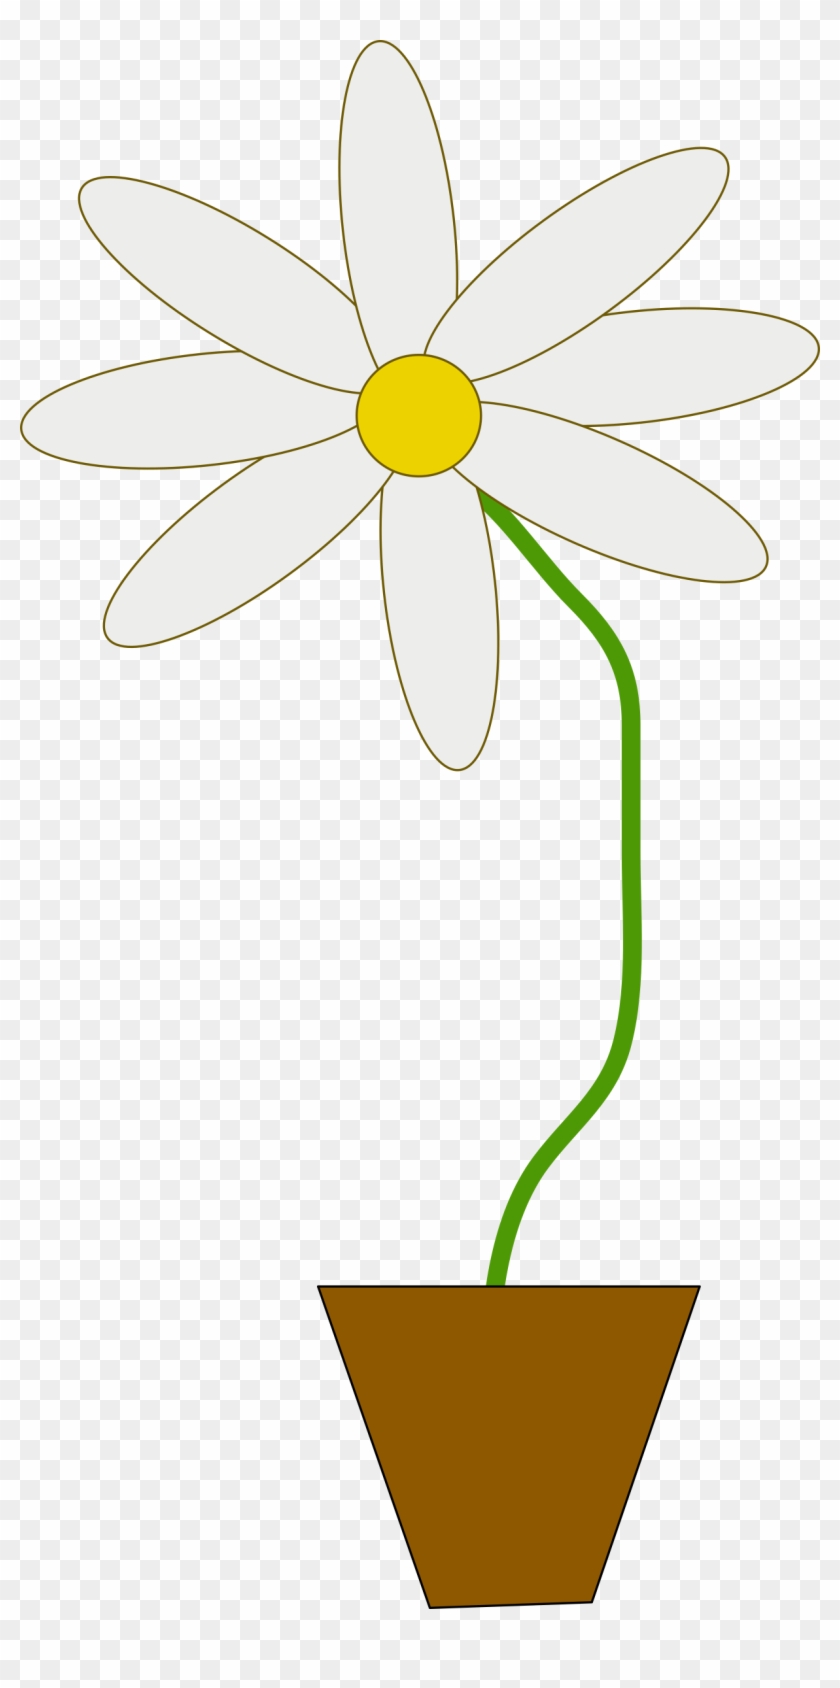 This Free Icons Png Design Of Flower In A Pot - Flower In Pot Clip Art Transparent Png